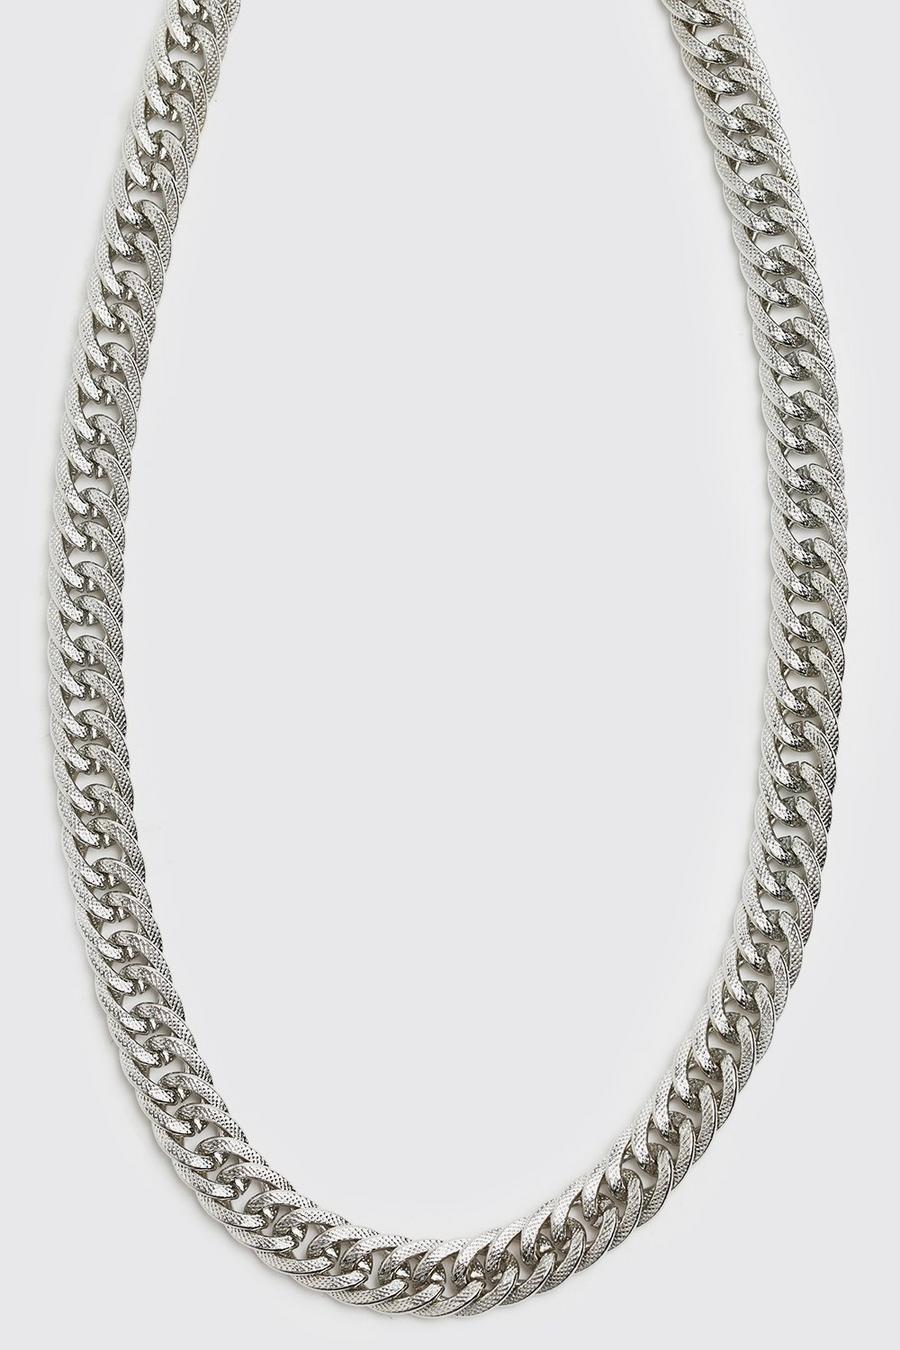 White Mens Necklaces BoohooMAN Necklaces for Men BoohooMAN Heavy Weight Toggle Detail Chain Necklace in Silver 